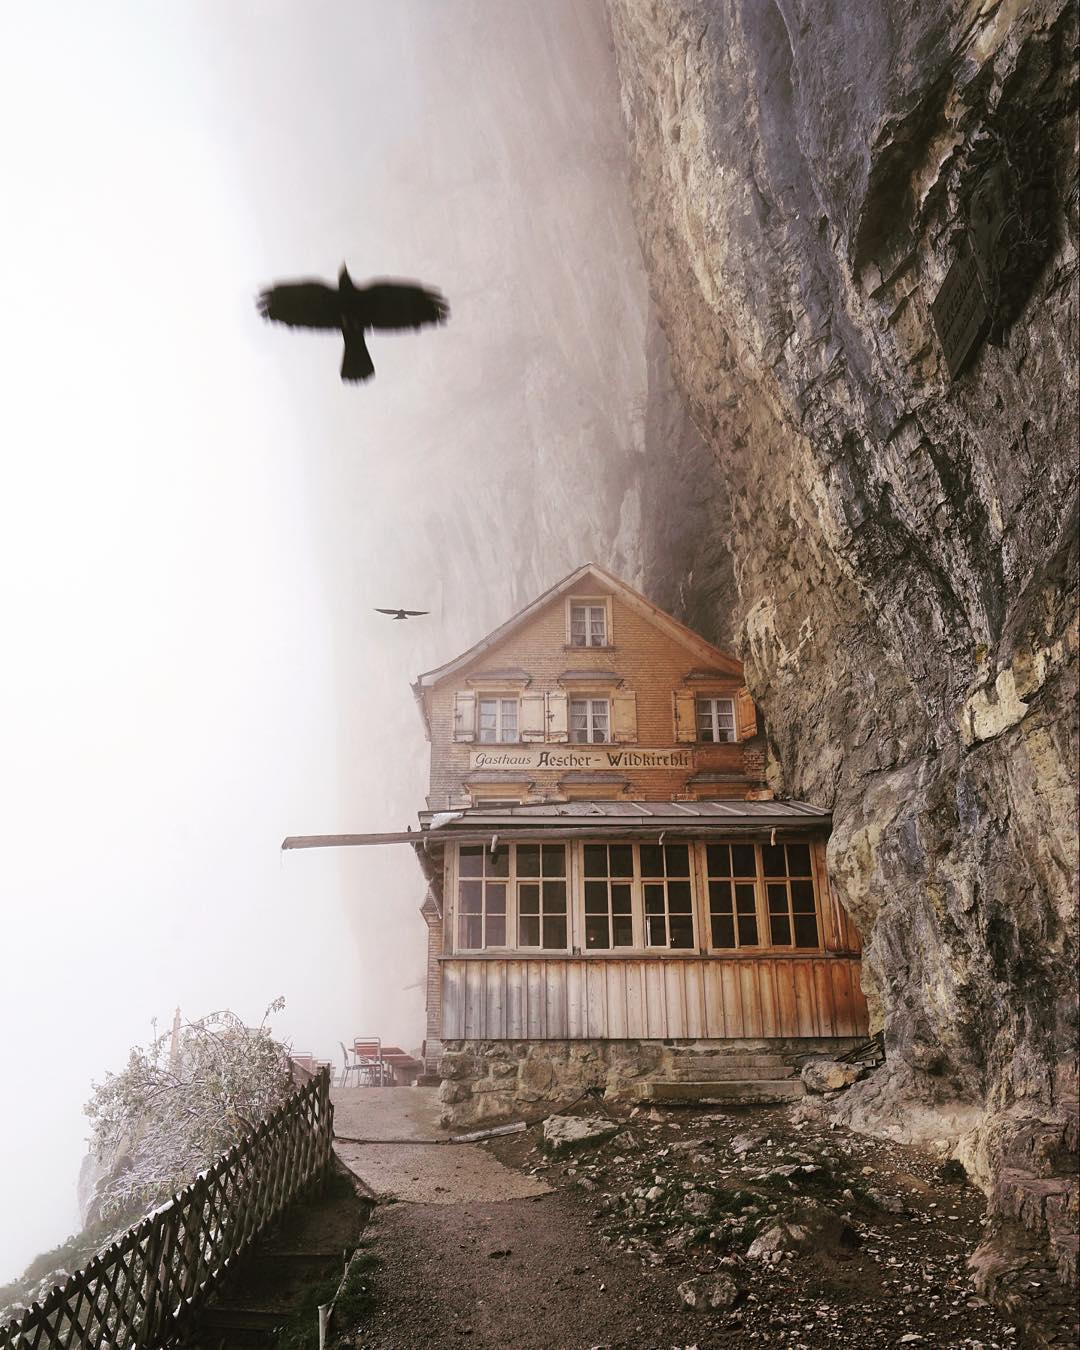 Photographical Journey Through the Beauty of Switzerland 20